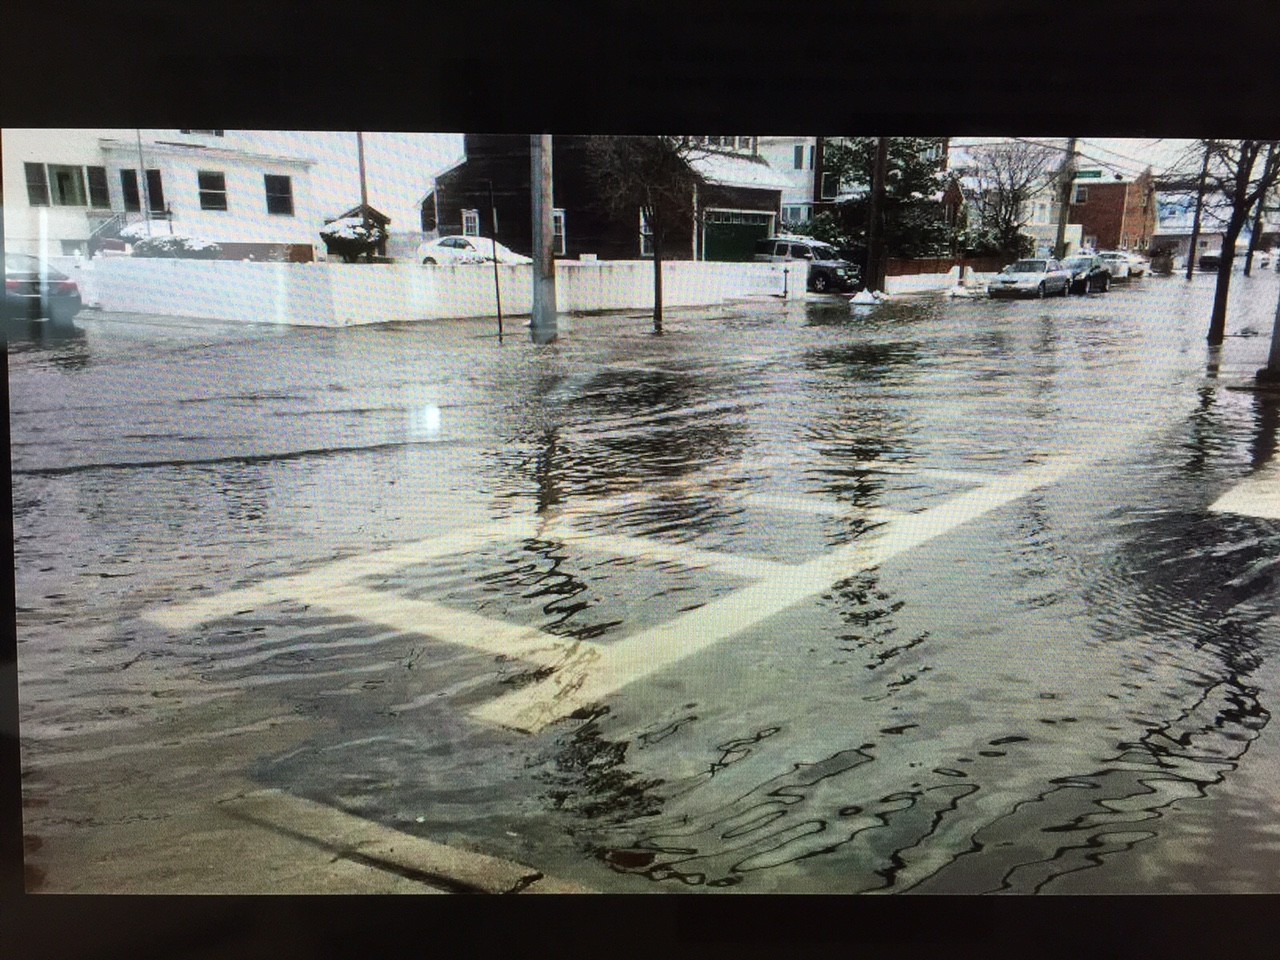 Significant flooding was reported again on Tuesday, including parts of West Park Avenue.